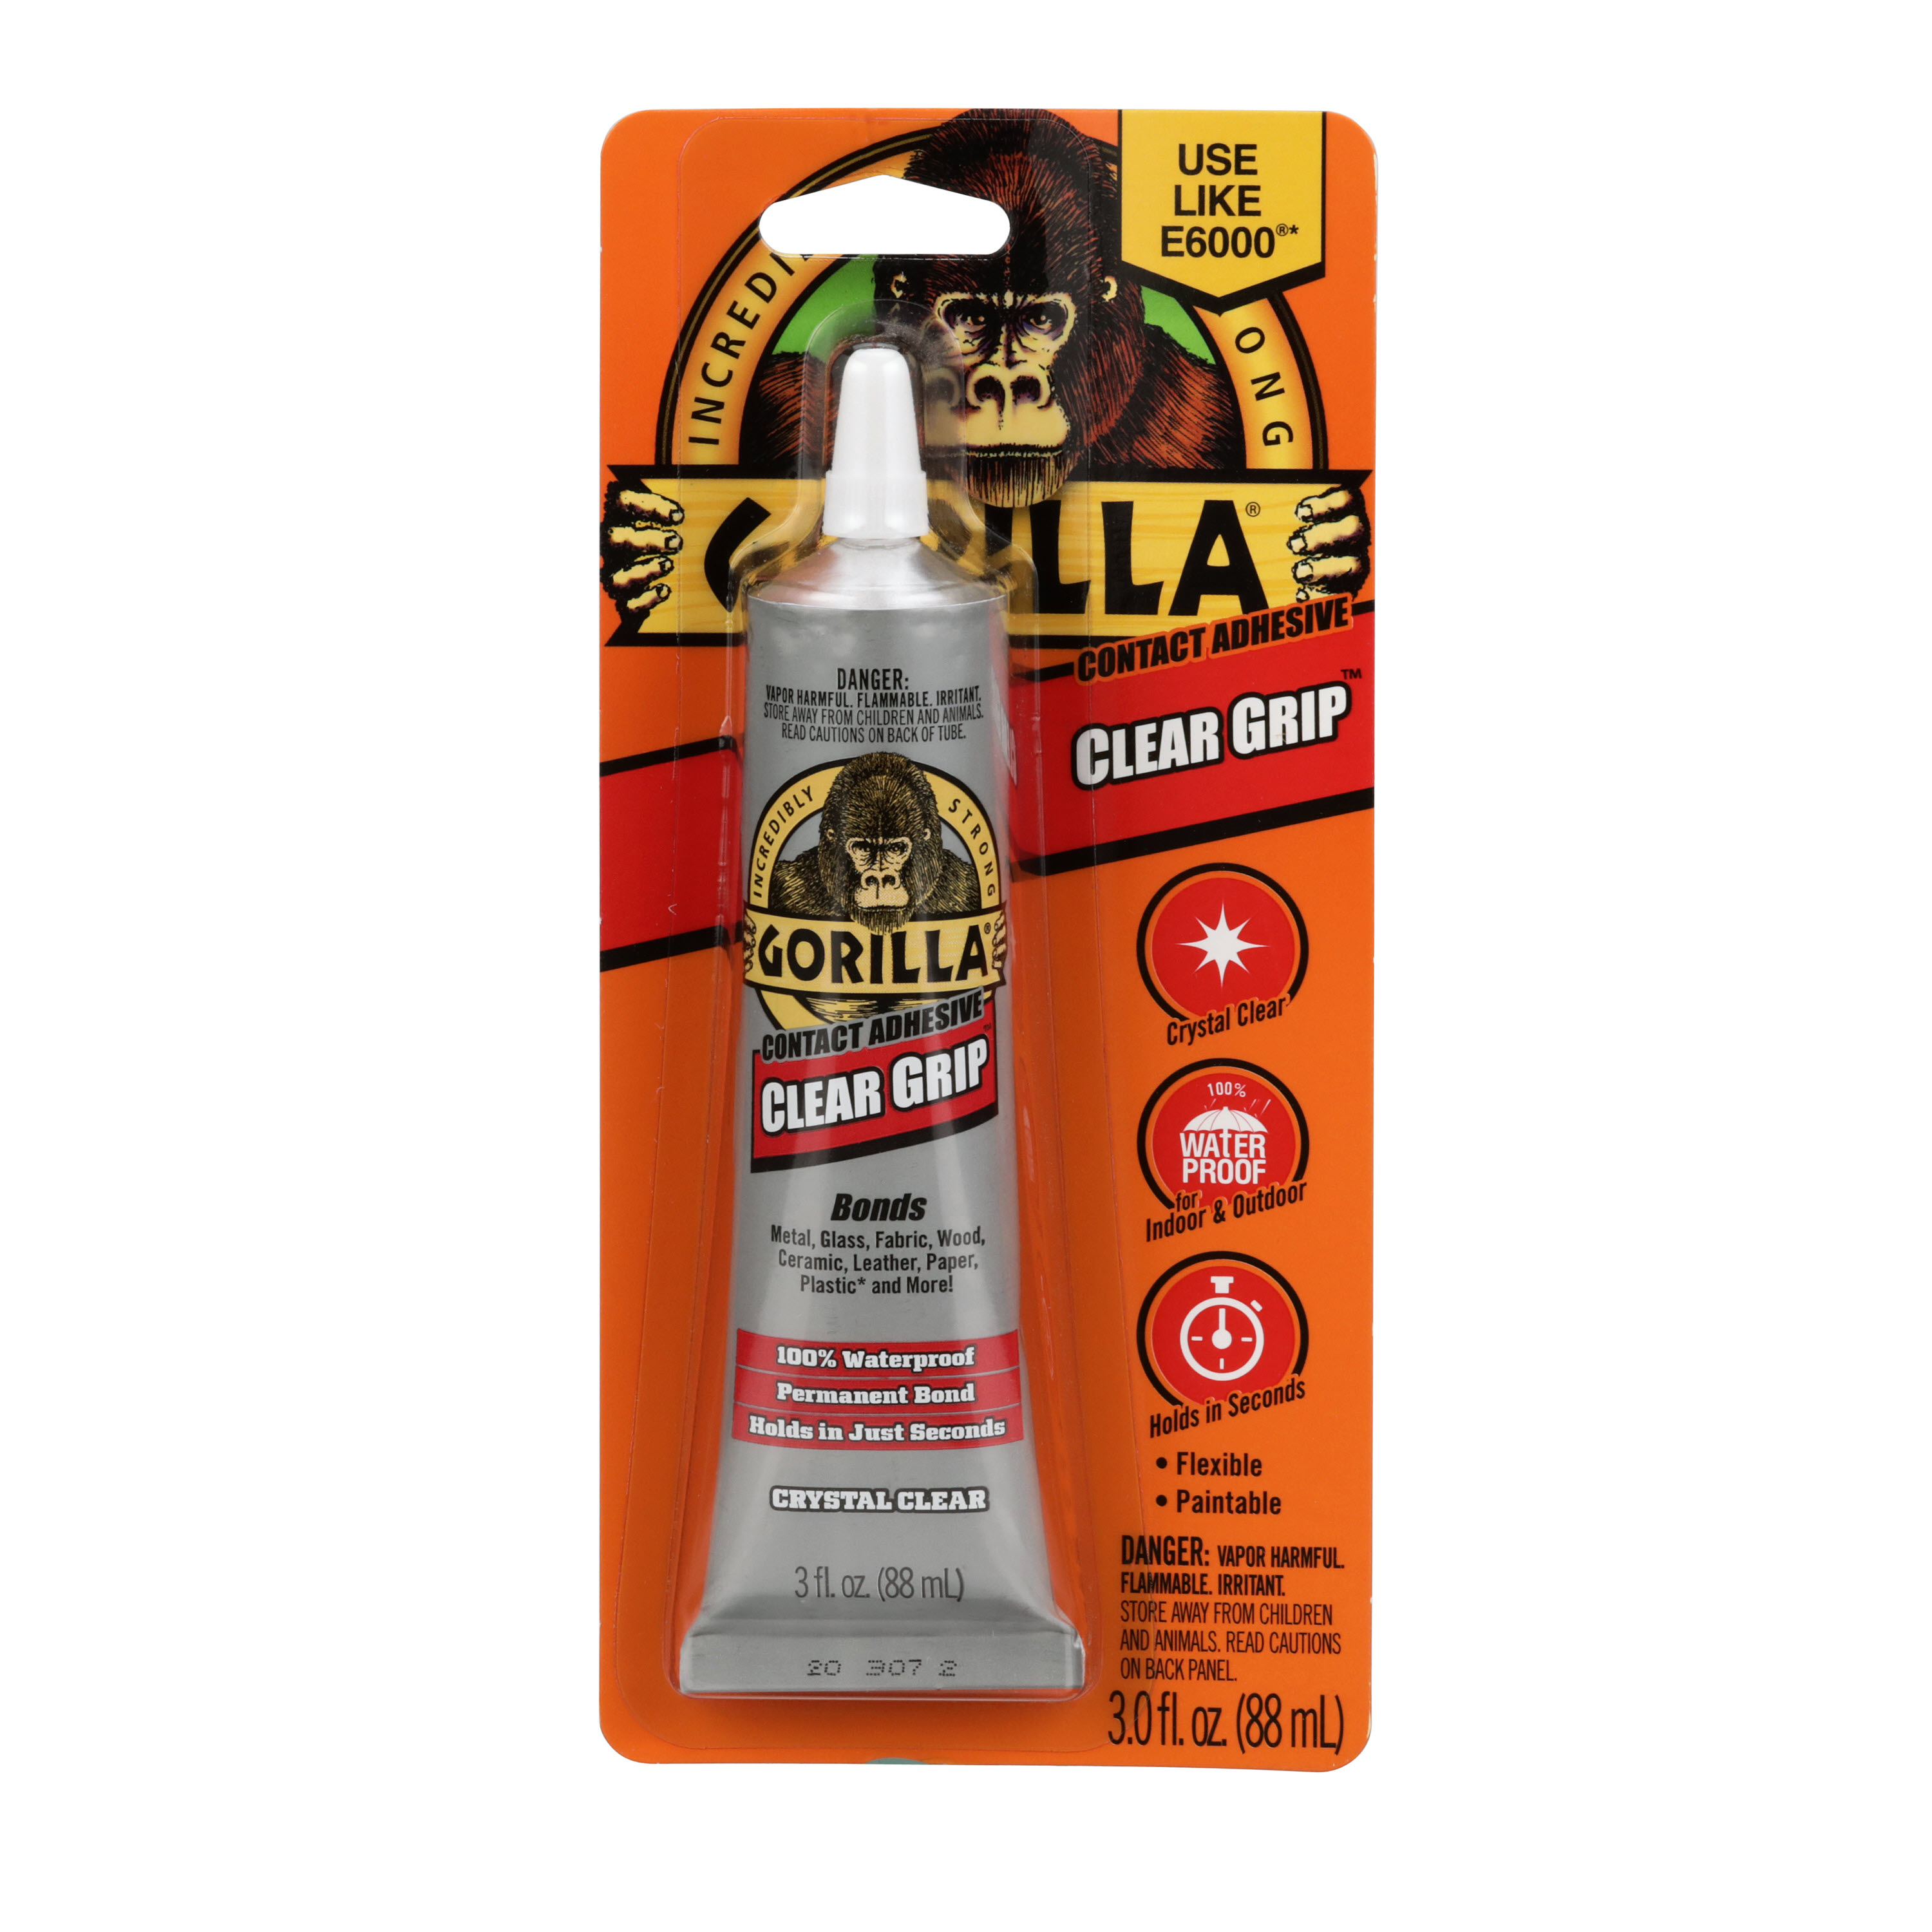 The Gorilla Glue Company - Gorilla Clear Grip is a flexible, fast holding,  crystal clear contact adhesive that creates a strong, permanent bond.  #gorillaglue #cleargrip #diy #repair #craftoftheday